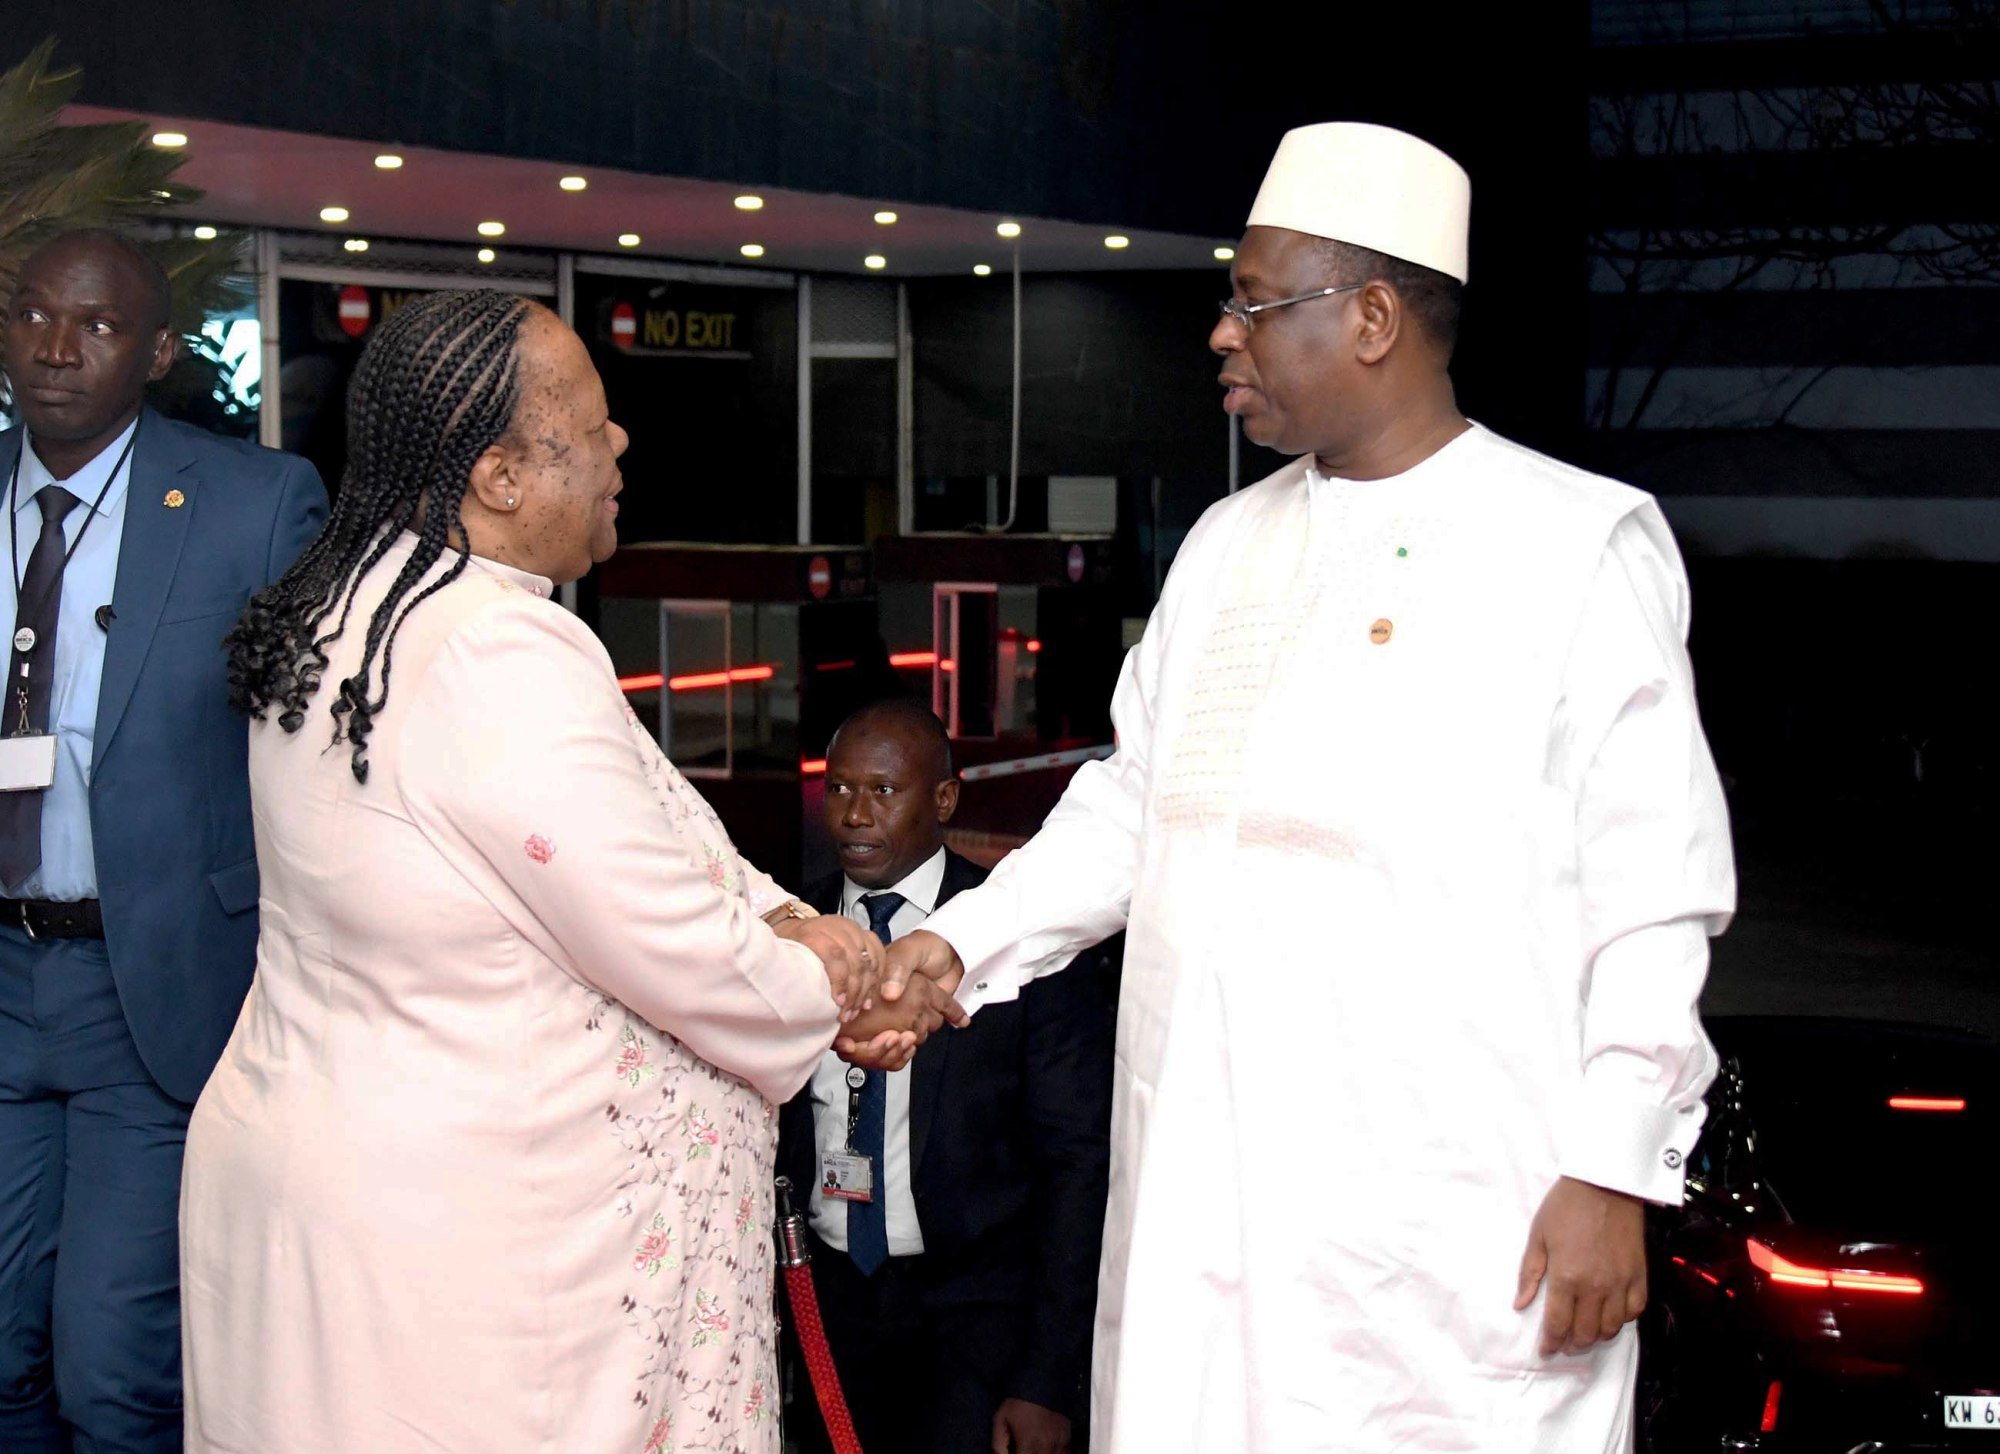 South Africa’s Minister of International Relations and Cooperation Grace Naledi Pandor (left) greets Senegalese President Macky Sall at a Brics state banquet at the Gallagher Estate Convention Centre in Johannesburg, South Africa, on August 23. South Africa invited many African leaders to the Brics summit. Photo: EPA-EFE